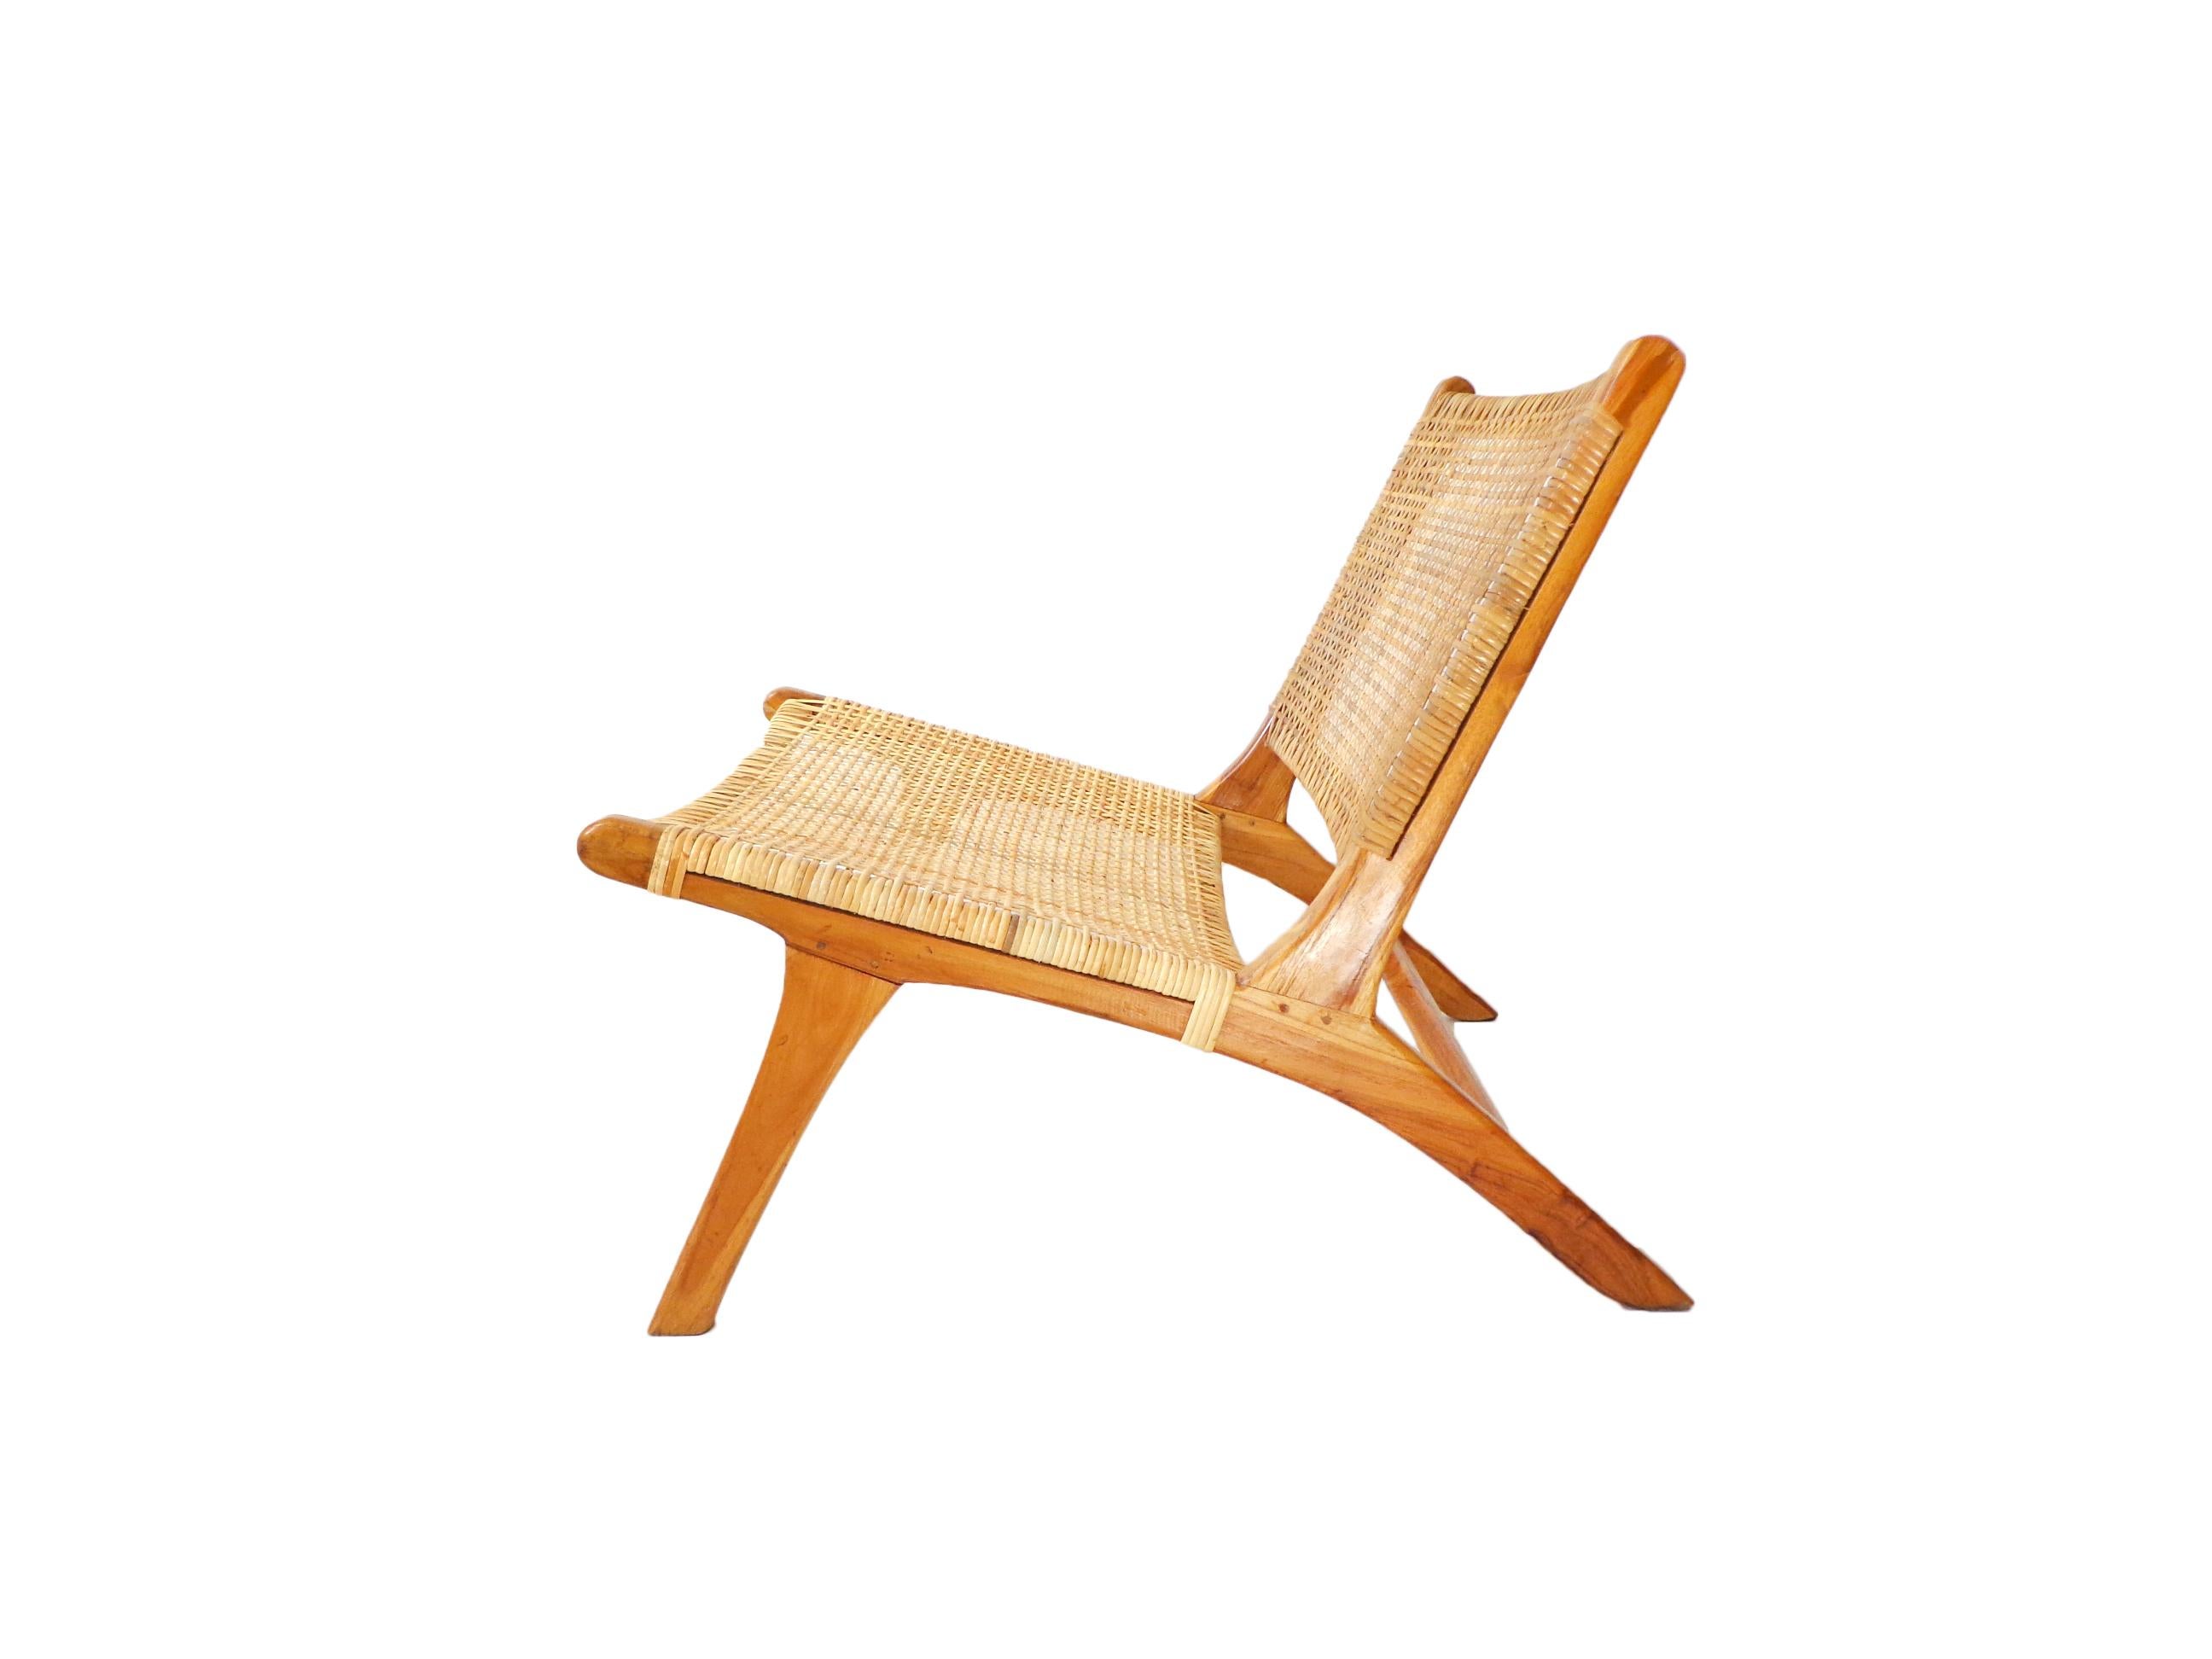 Lounge chair, cane and solid wood, natural and handmade easy chair. Very comfortable.